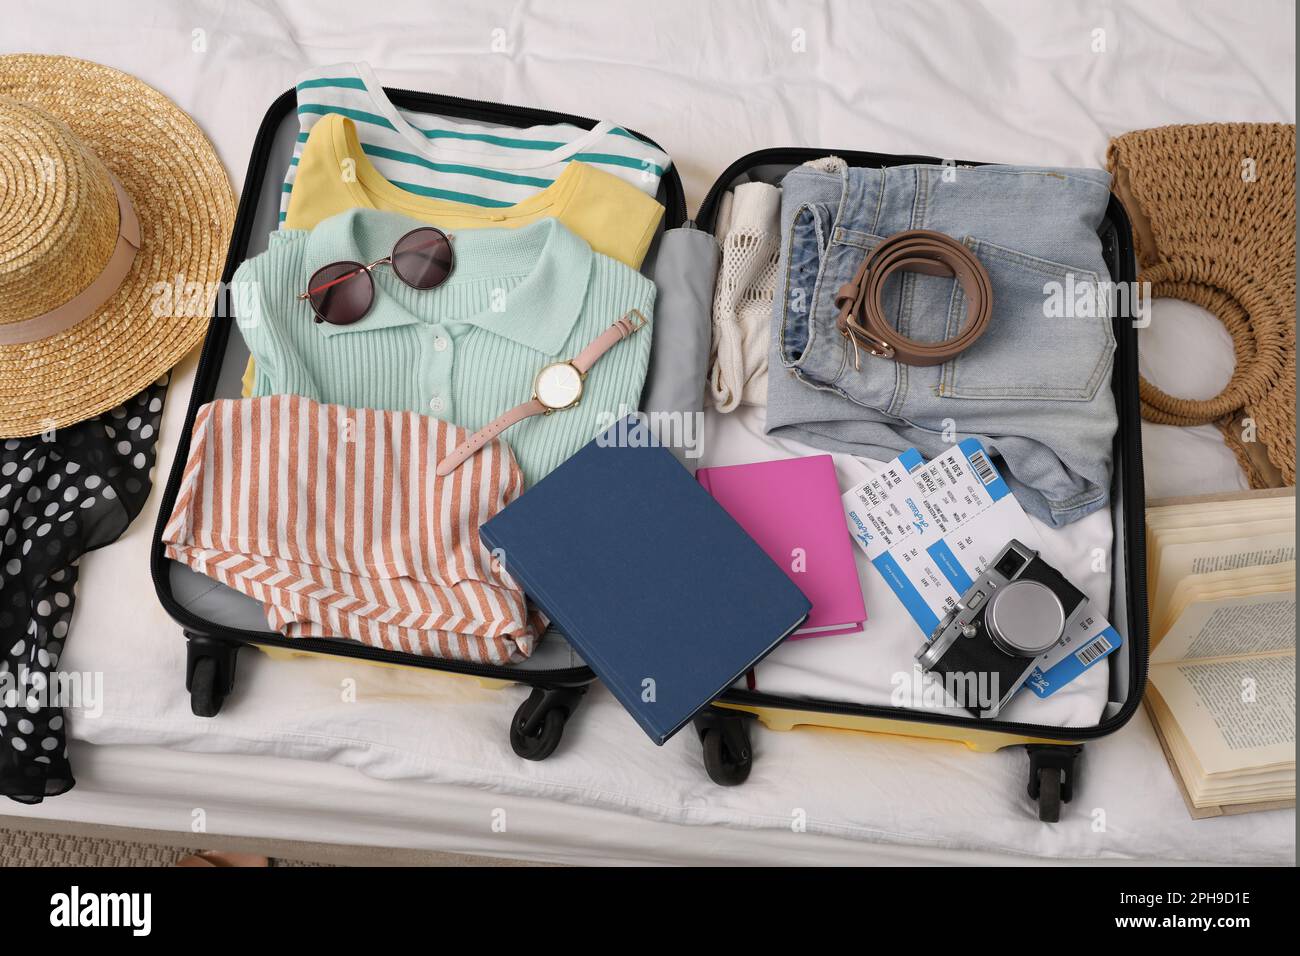 https://c8.alamy.com/comp/2PH9D1E/open-suitcase-with-clothes-and-accessories-on-bed-flat-lay-2PH9D1E.jpg